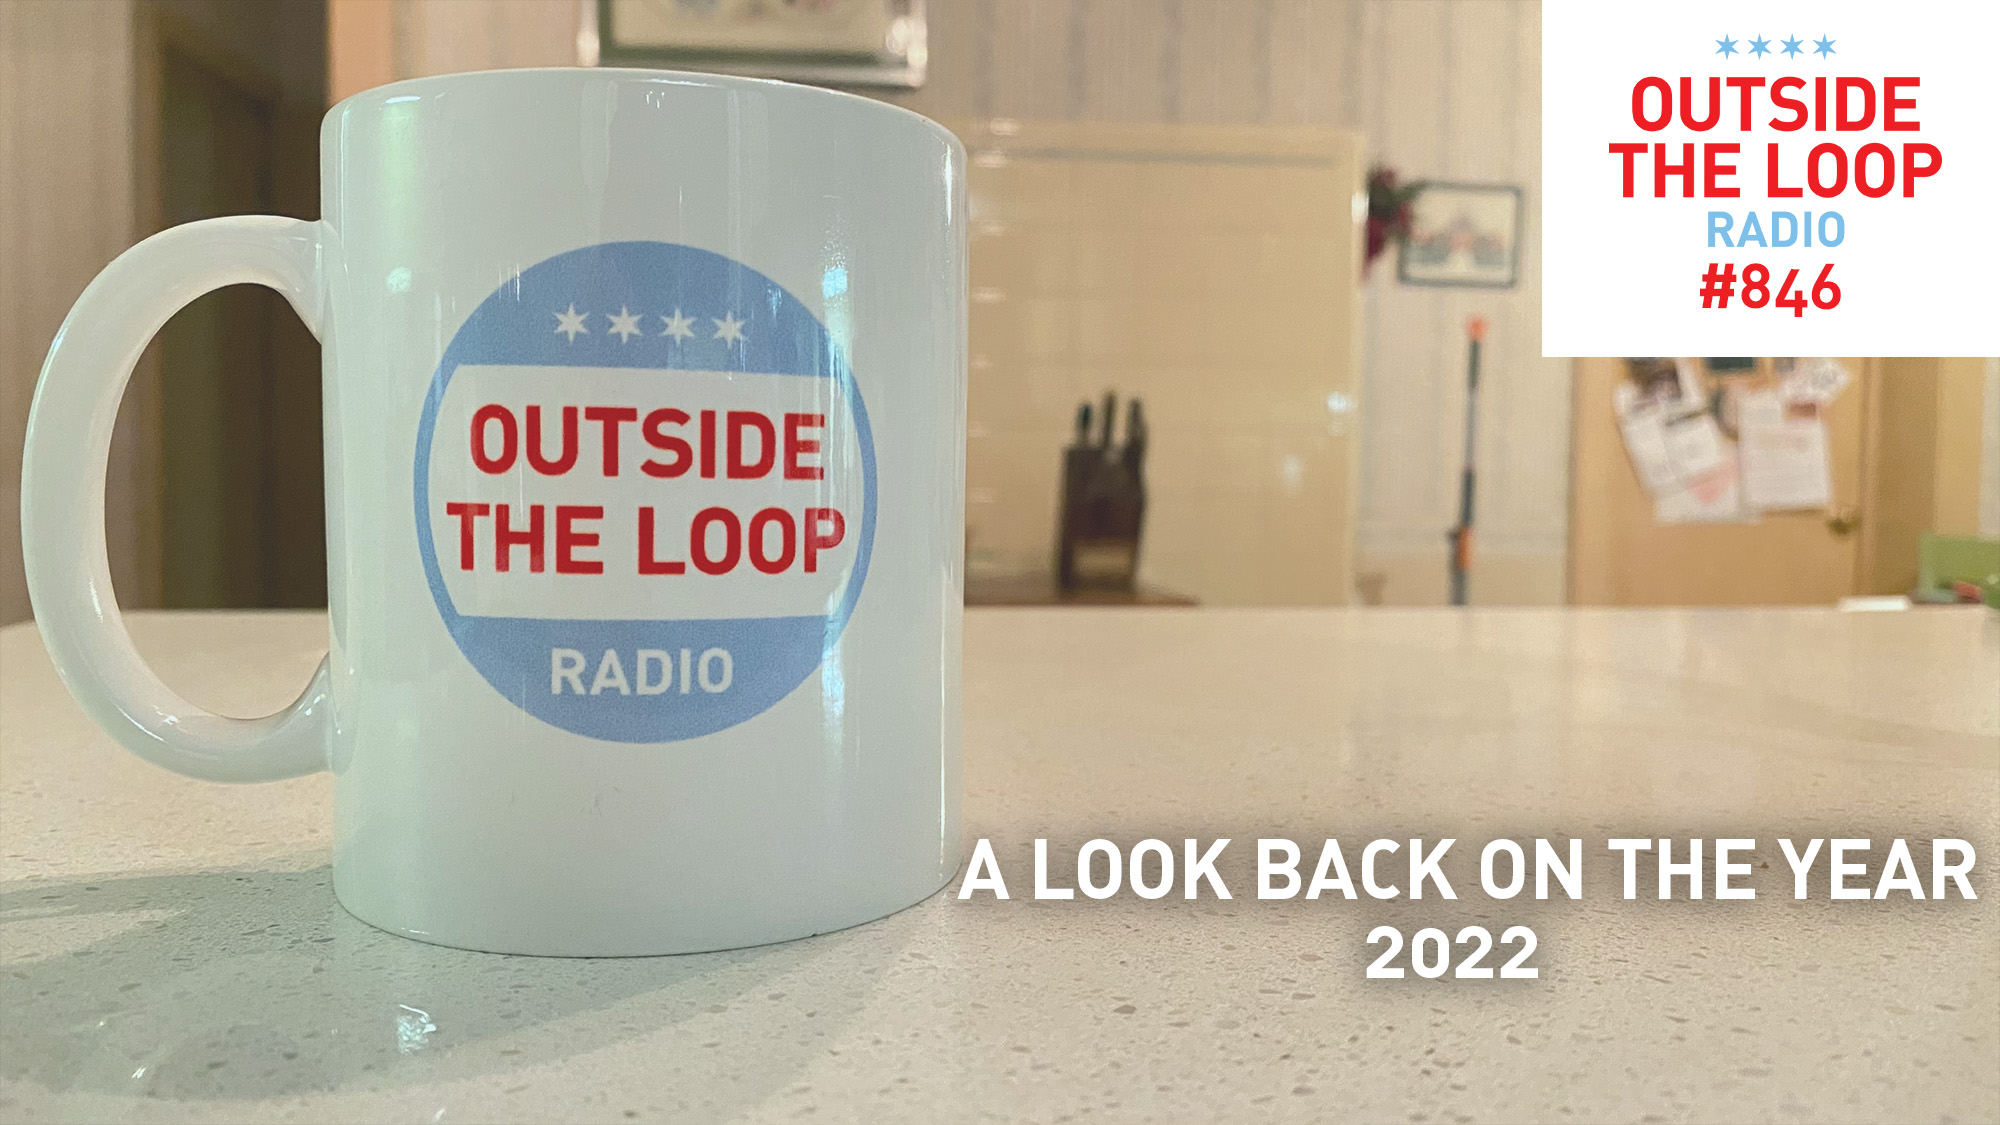 Pour a cup of coffee and enjoy a look back at a few conversations from 2022. (Photo credit: Mike Stephen/WGN Radio)